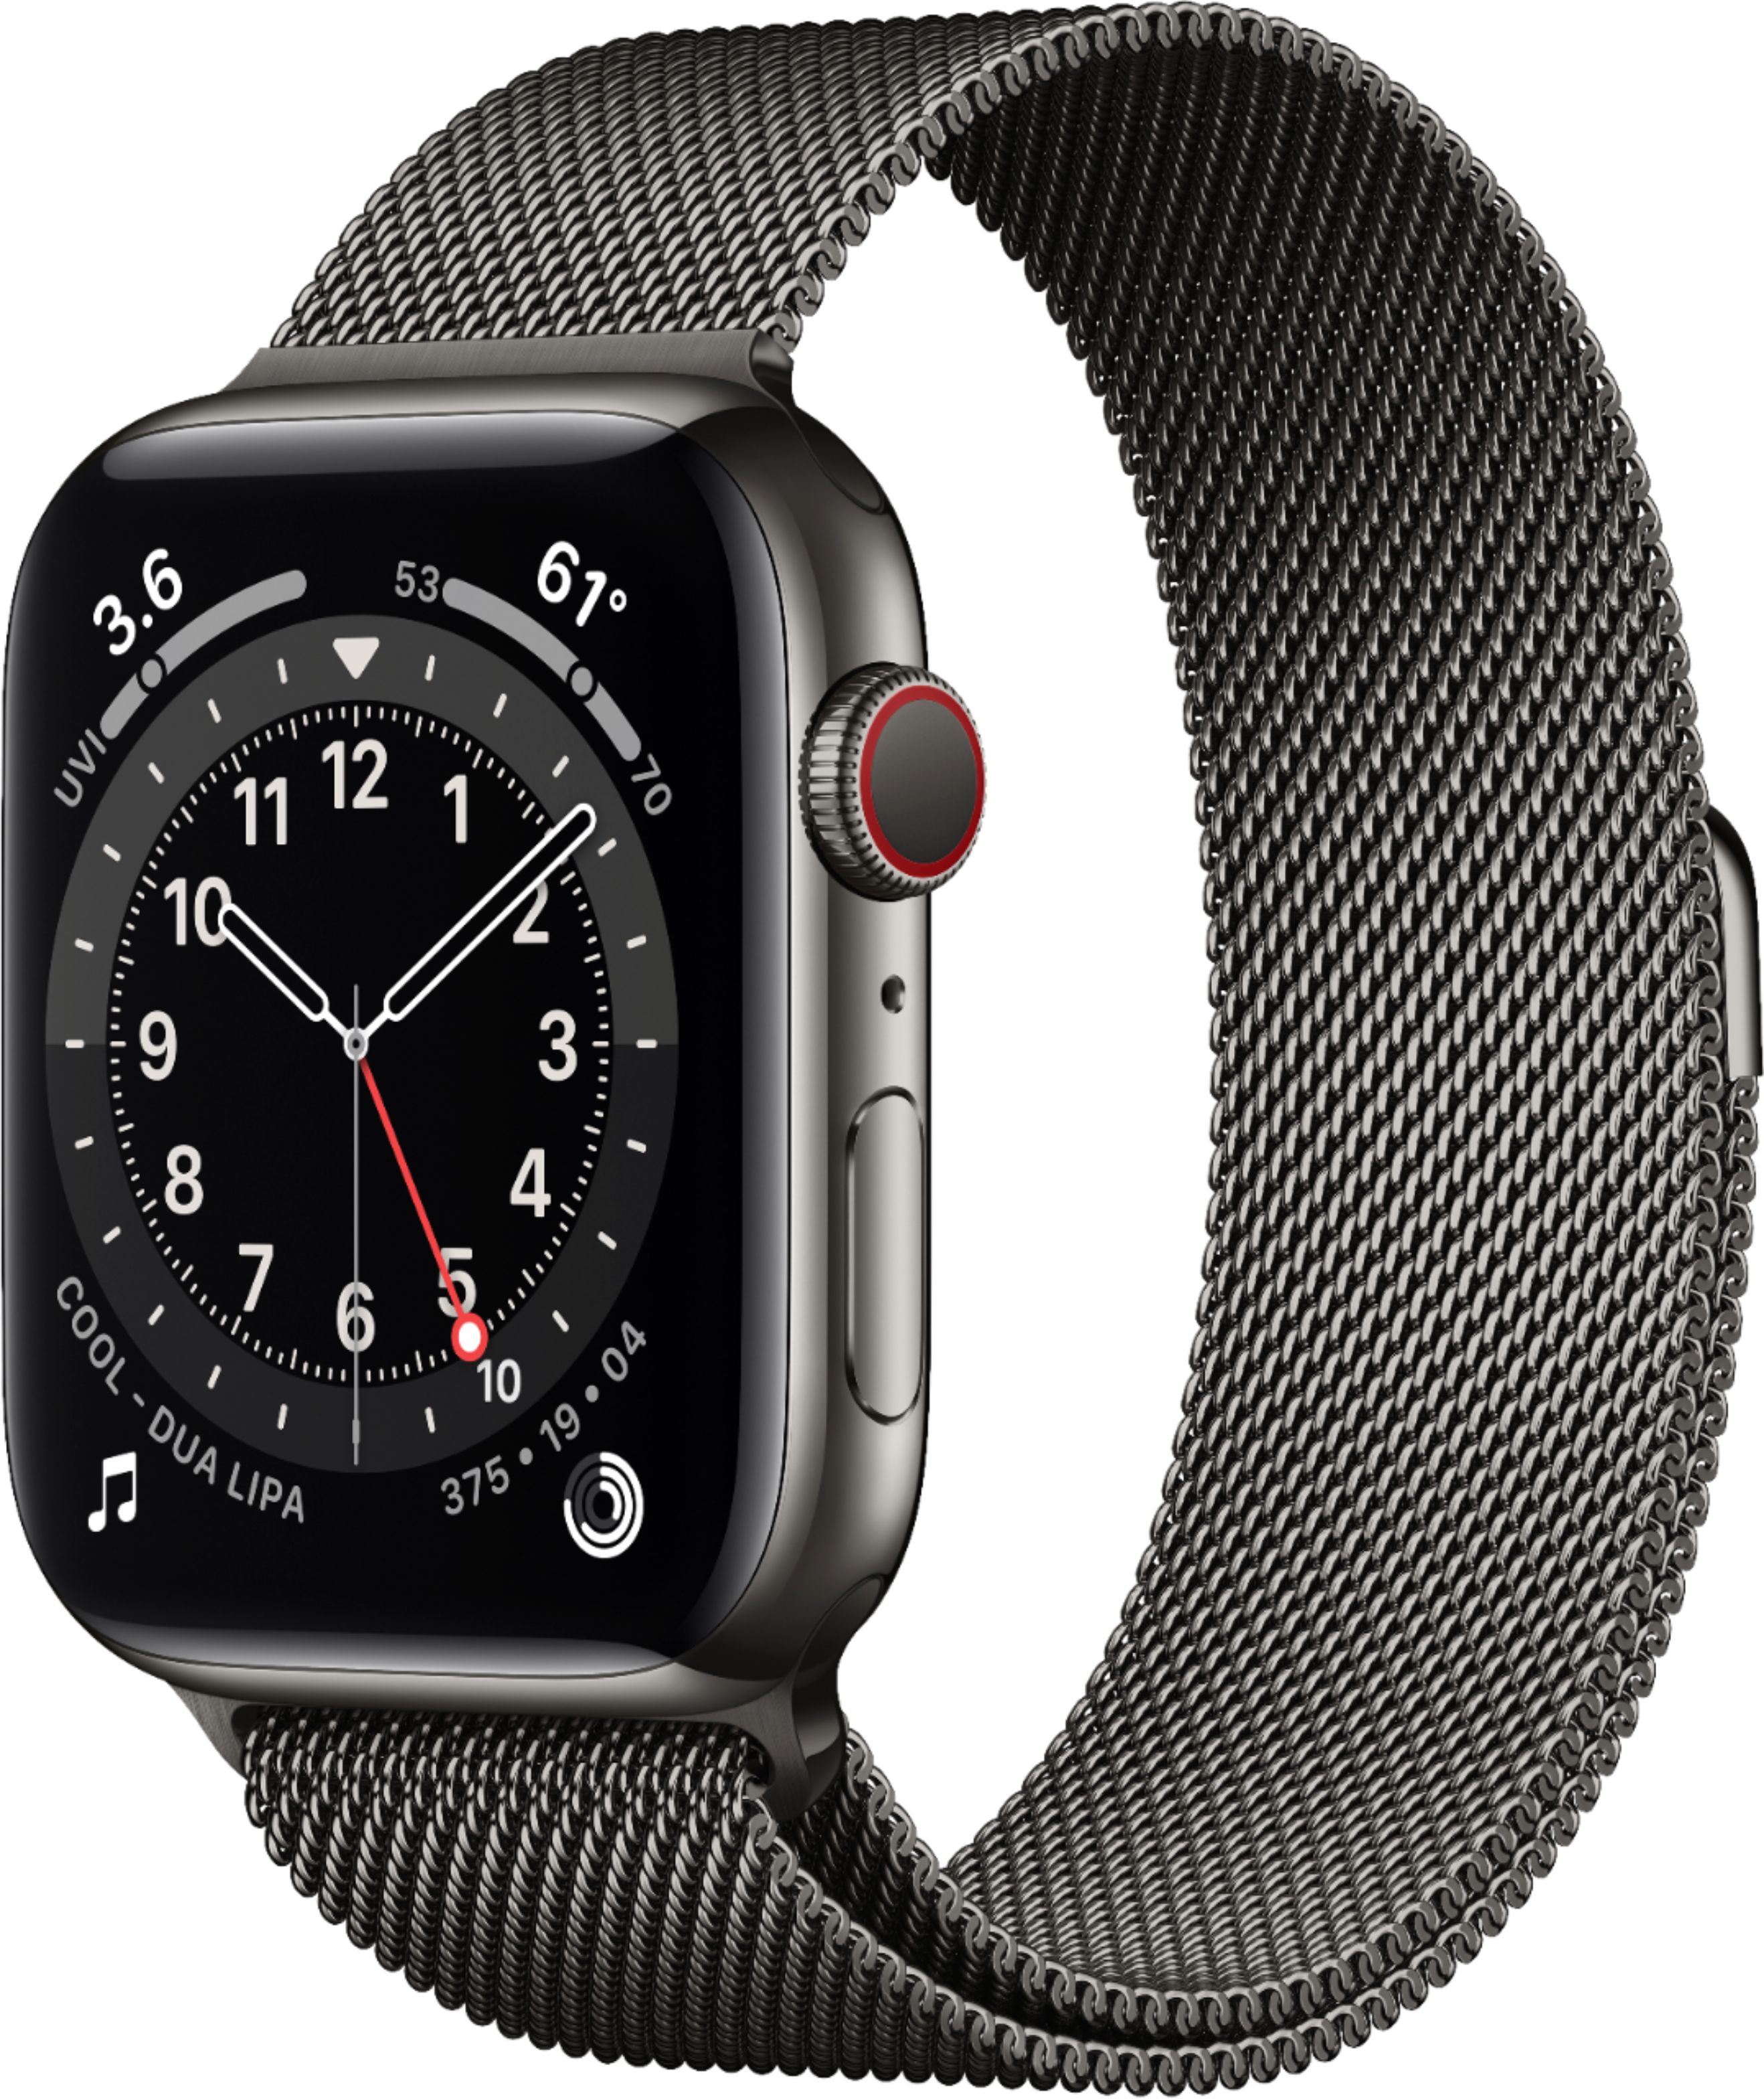 Apple Watch Series 6 (GPS + Cellular) 44mm Graphite Stainless Steel Case  with Graphite Milanese Loop Silver M07R3LL/A - Best Buy